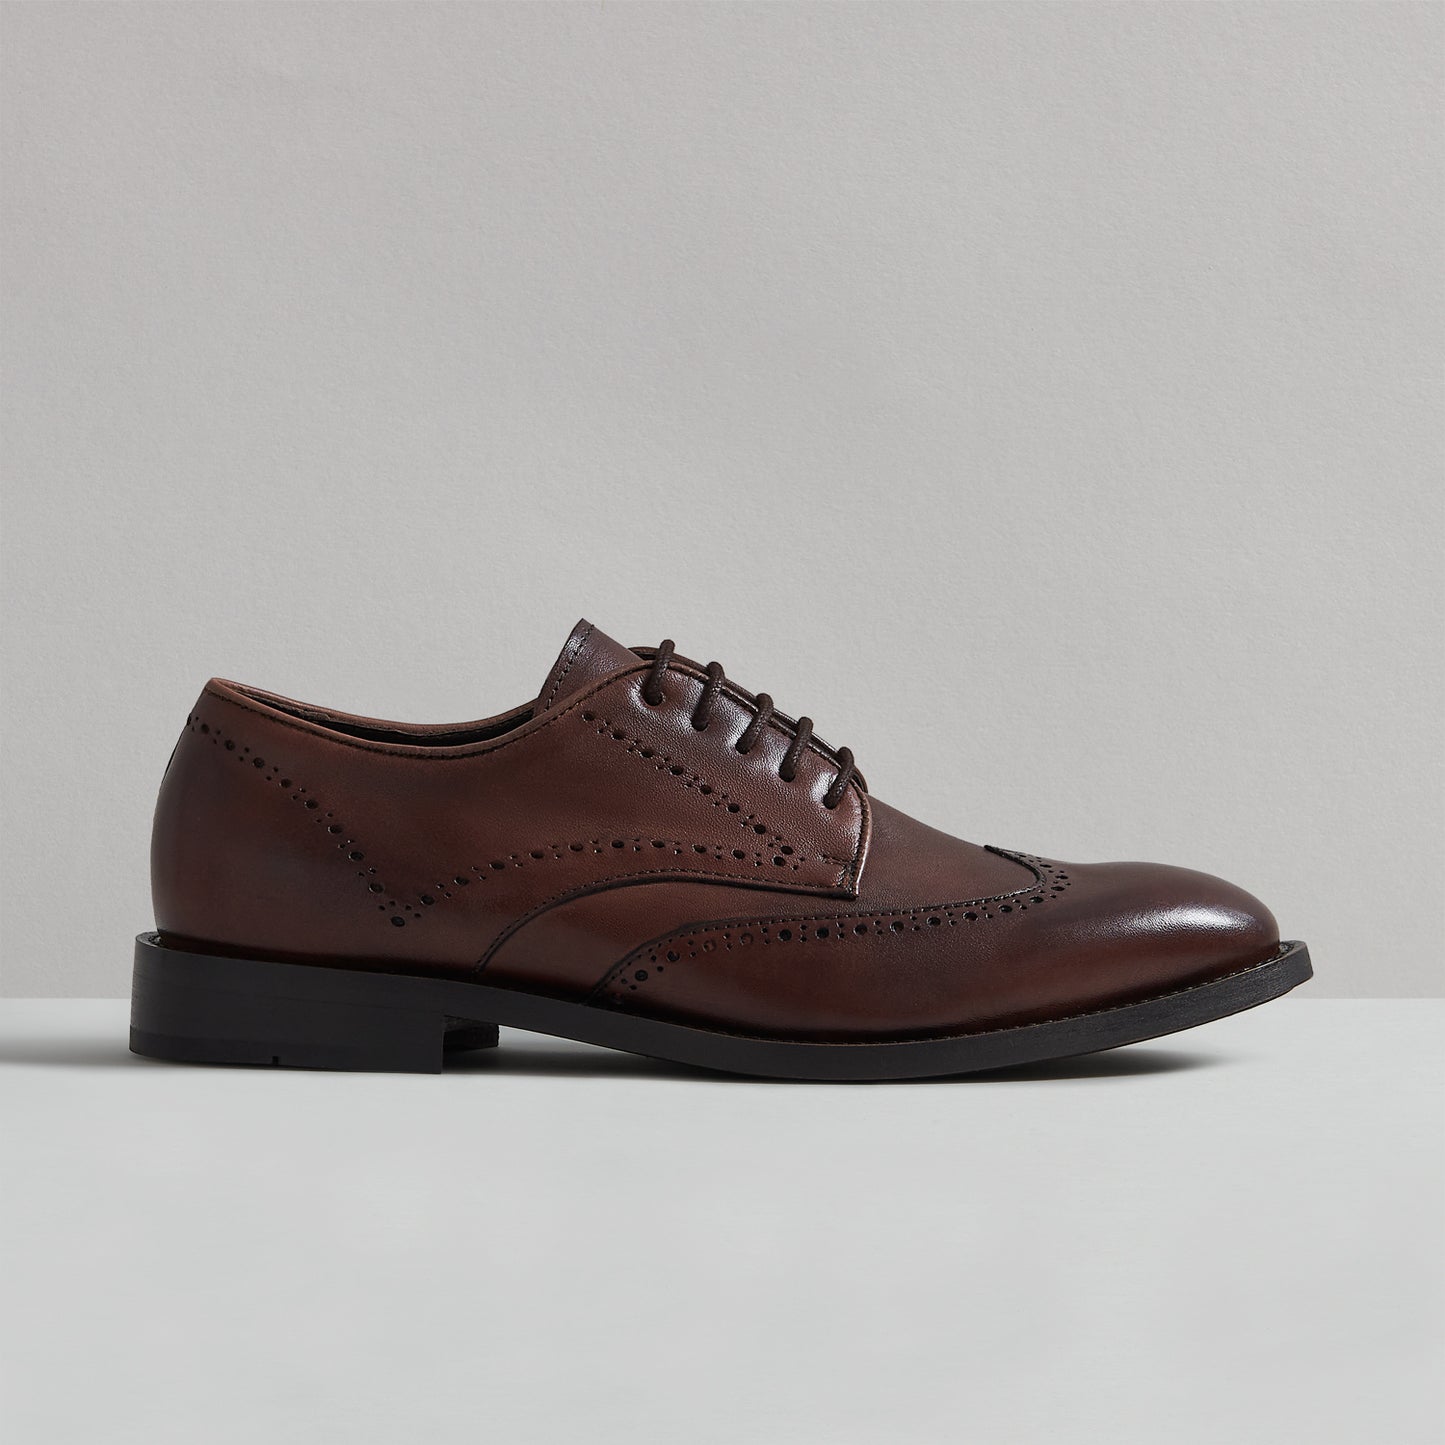 WINSLOW BROWN LEATHER BROGUE